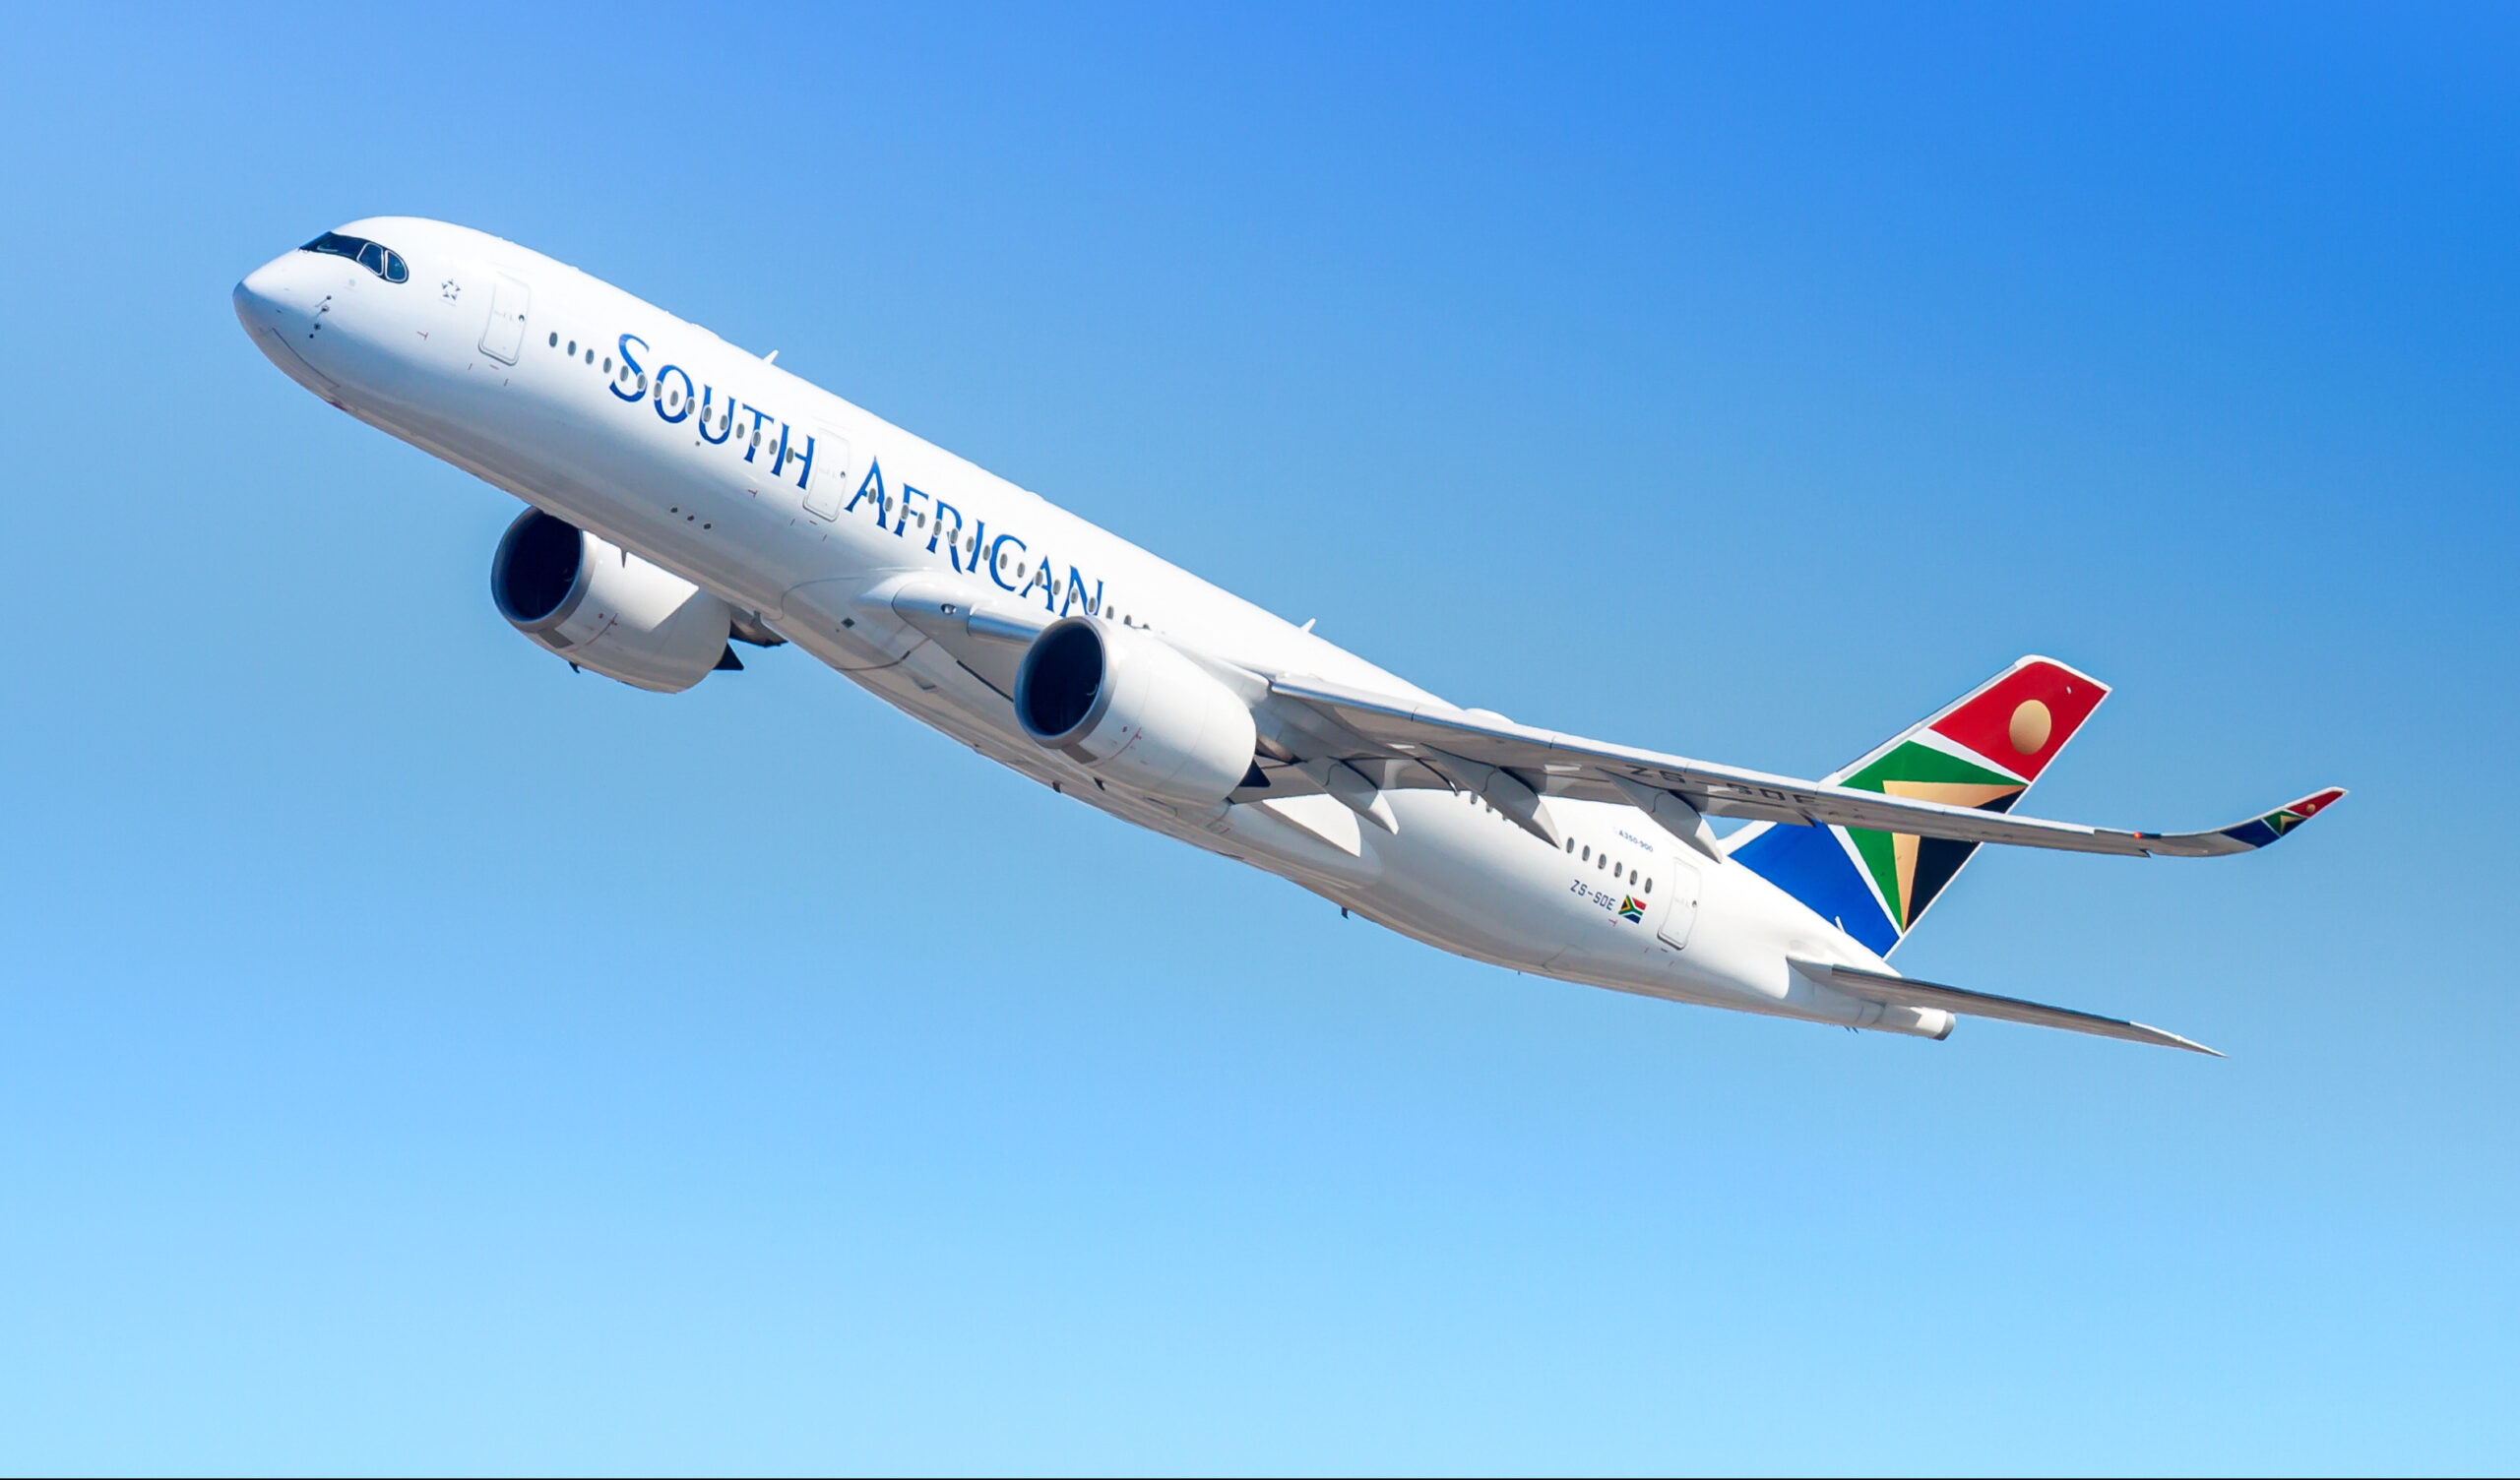 South African Airways Pricing and Revenue Management Internship Opportunity